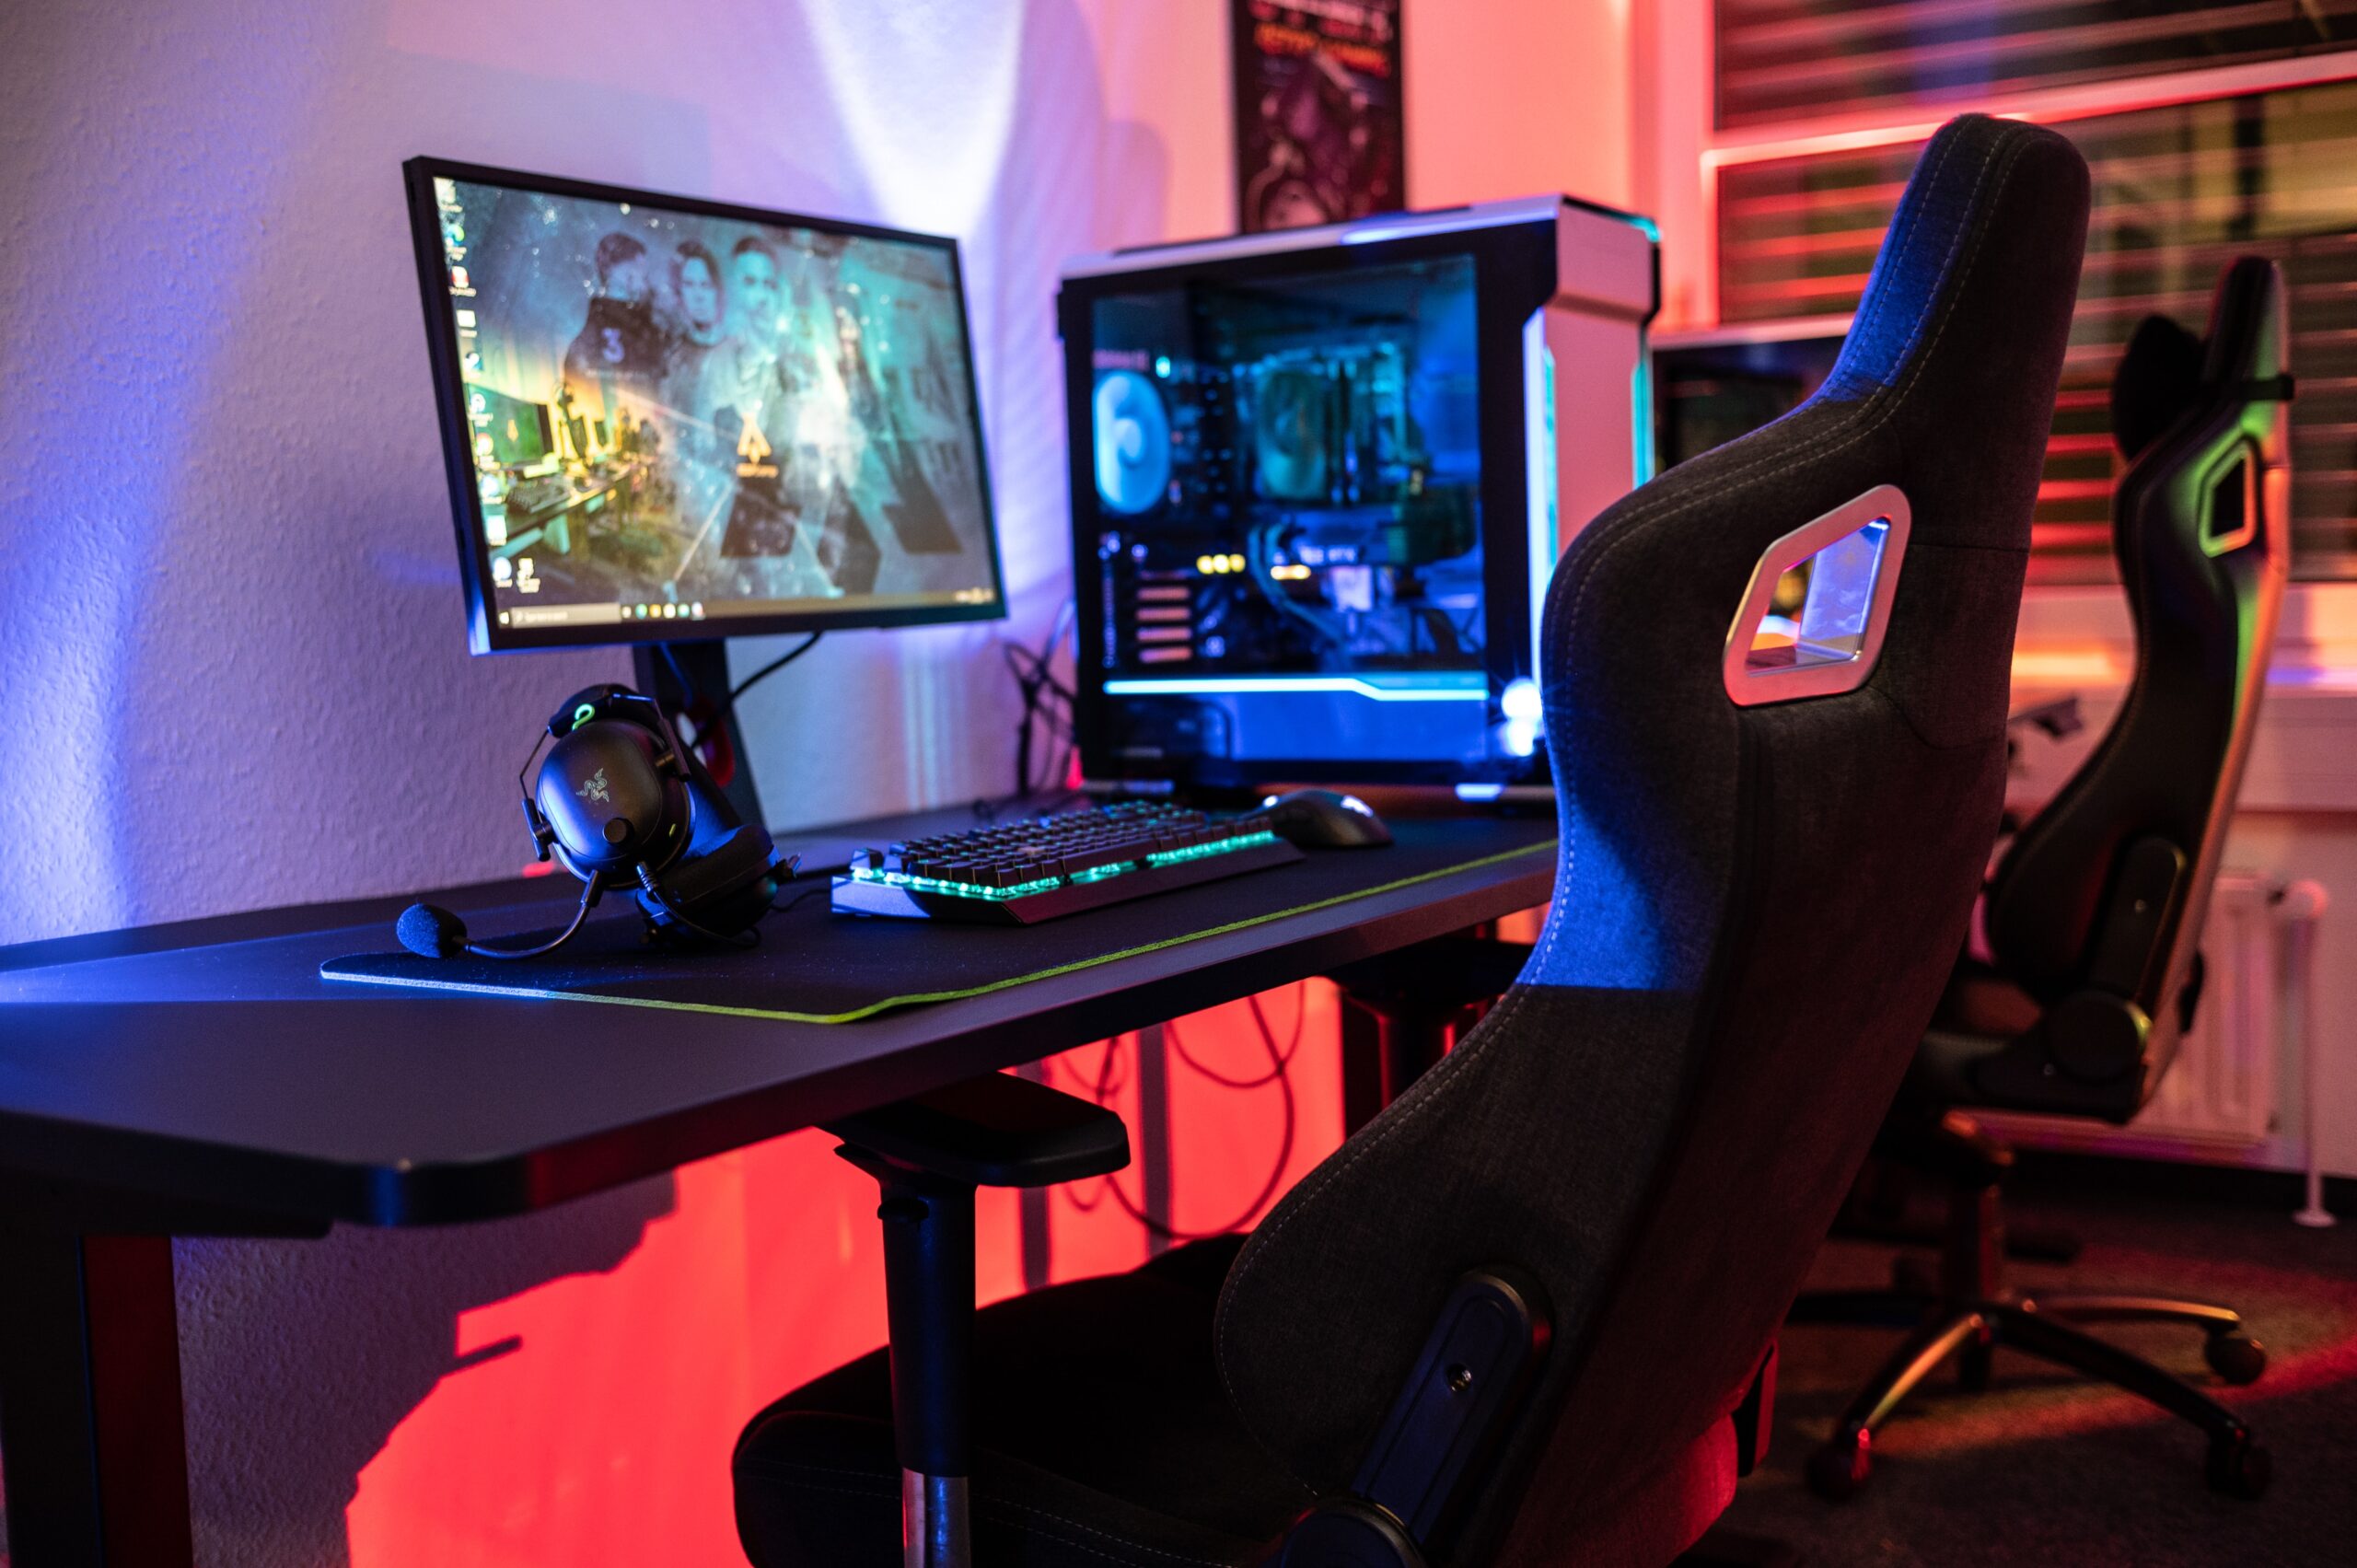 A brightly lit PC gaming setup with a comfortable chair, monitor, and desk